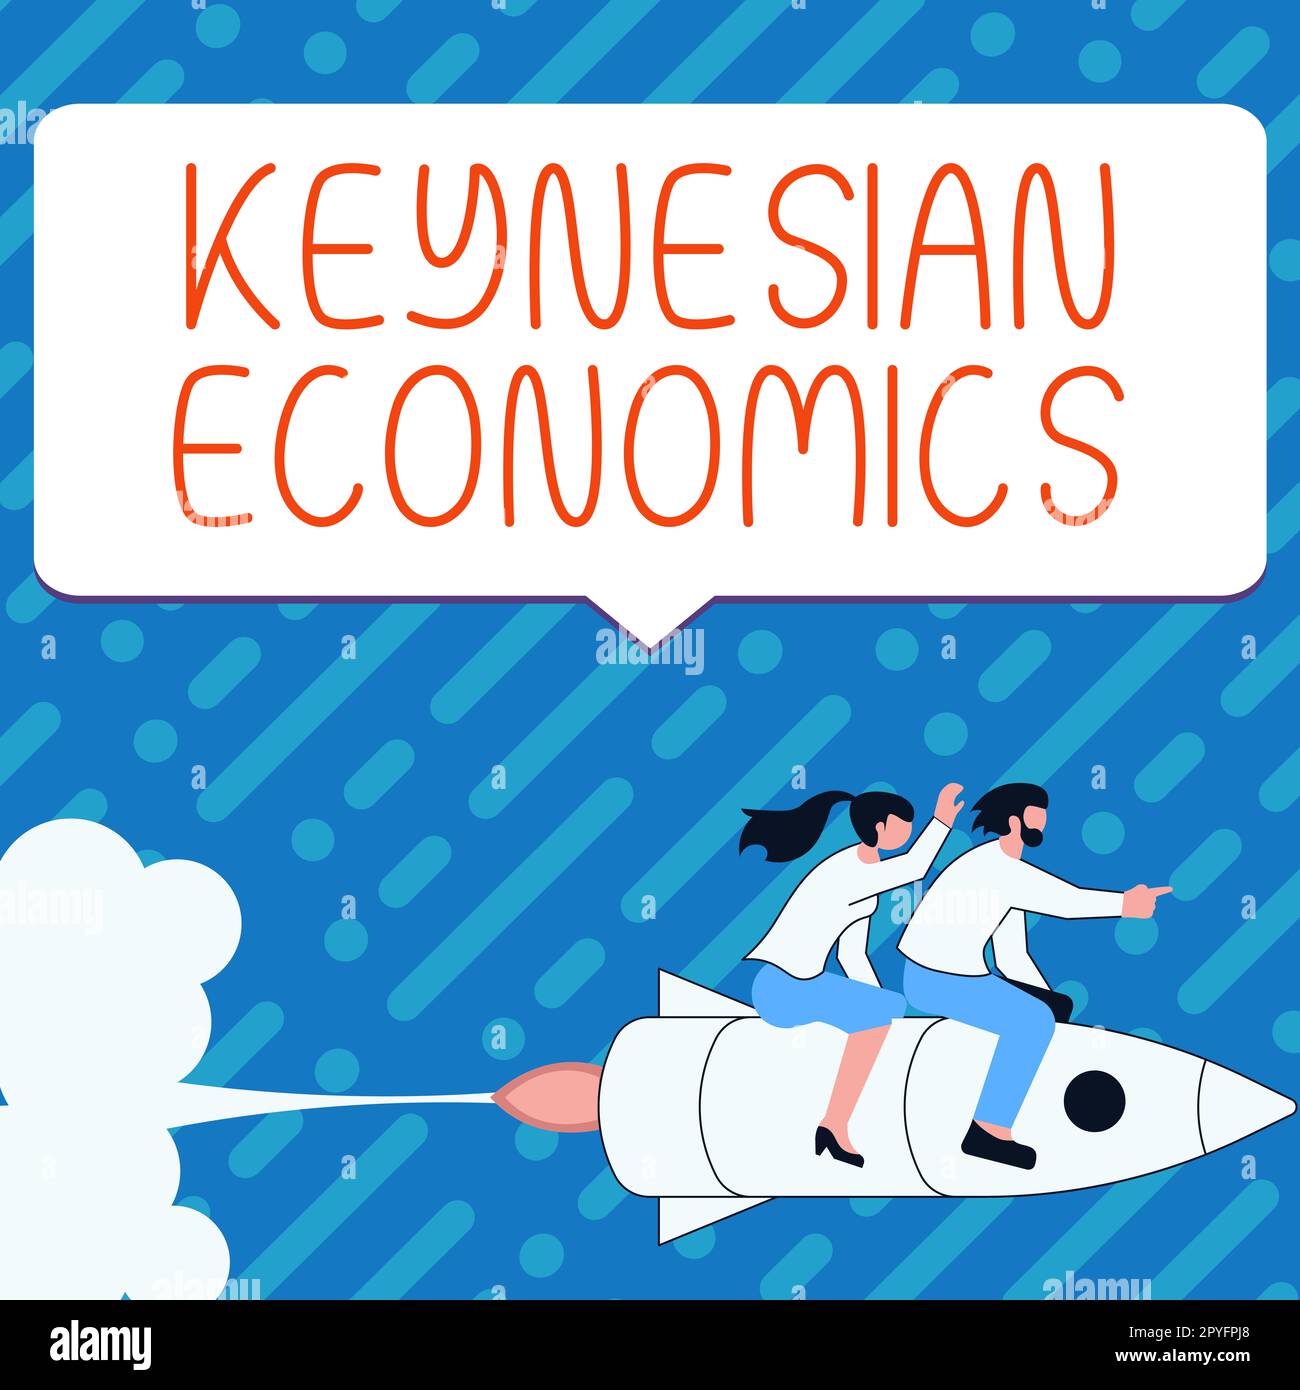 Inspiration showing sign Keynesian Economics. Conceptual photo monetary and fiscal programs by government to increase employment Stock Photo